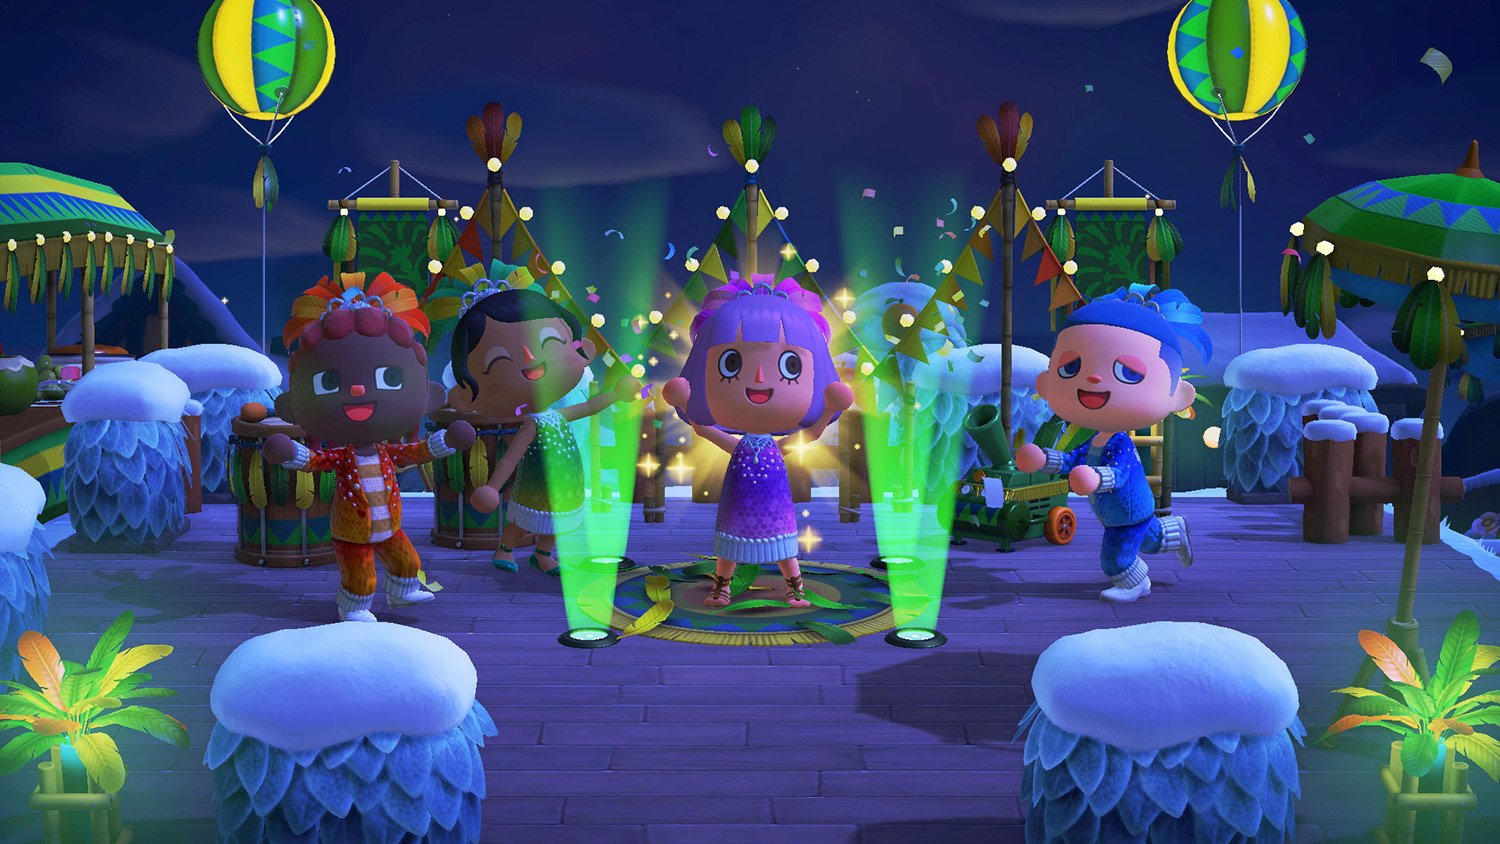 Animal Crossing: New Horizons players celebrate the Festivale event in February